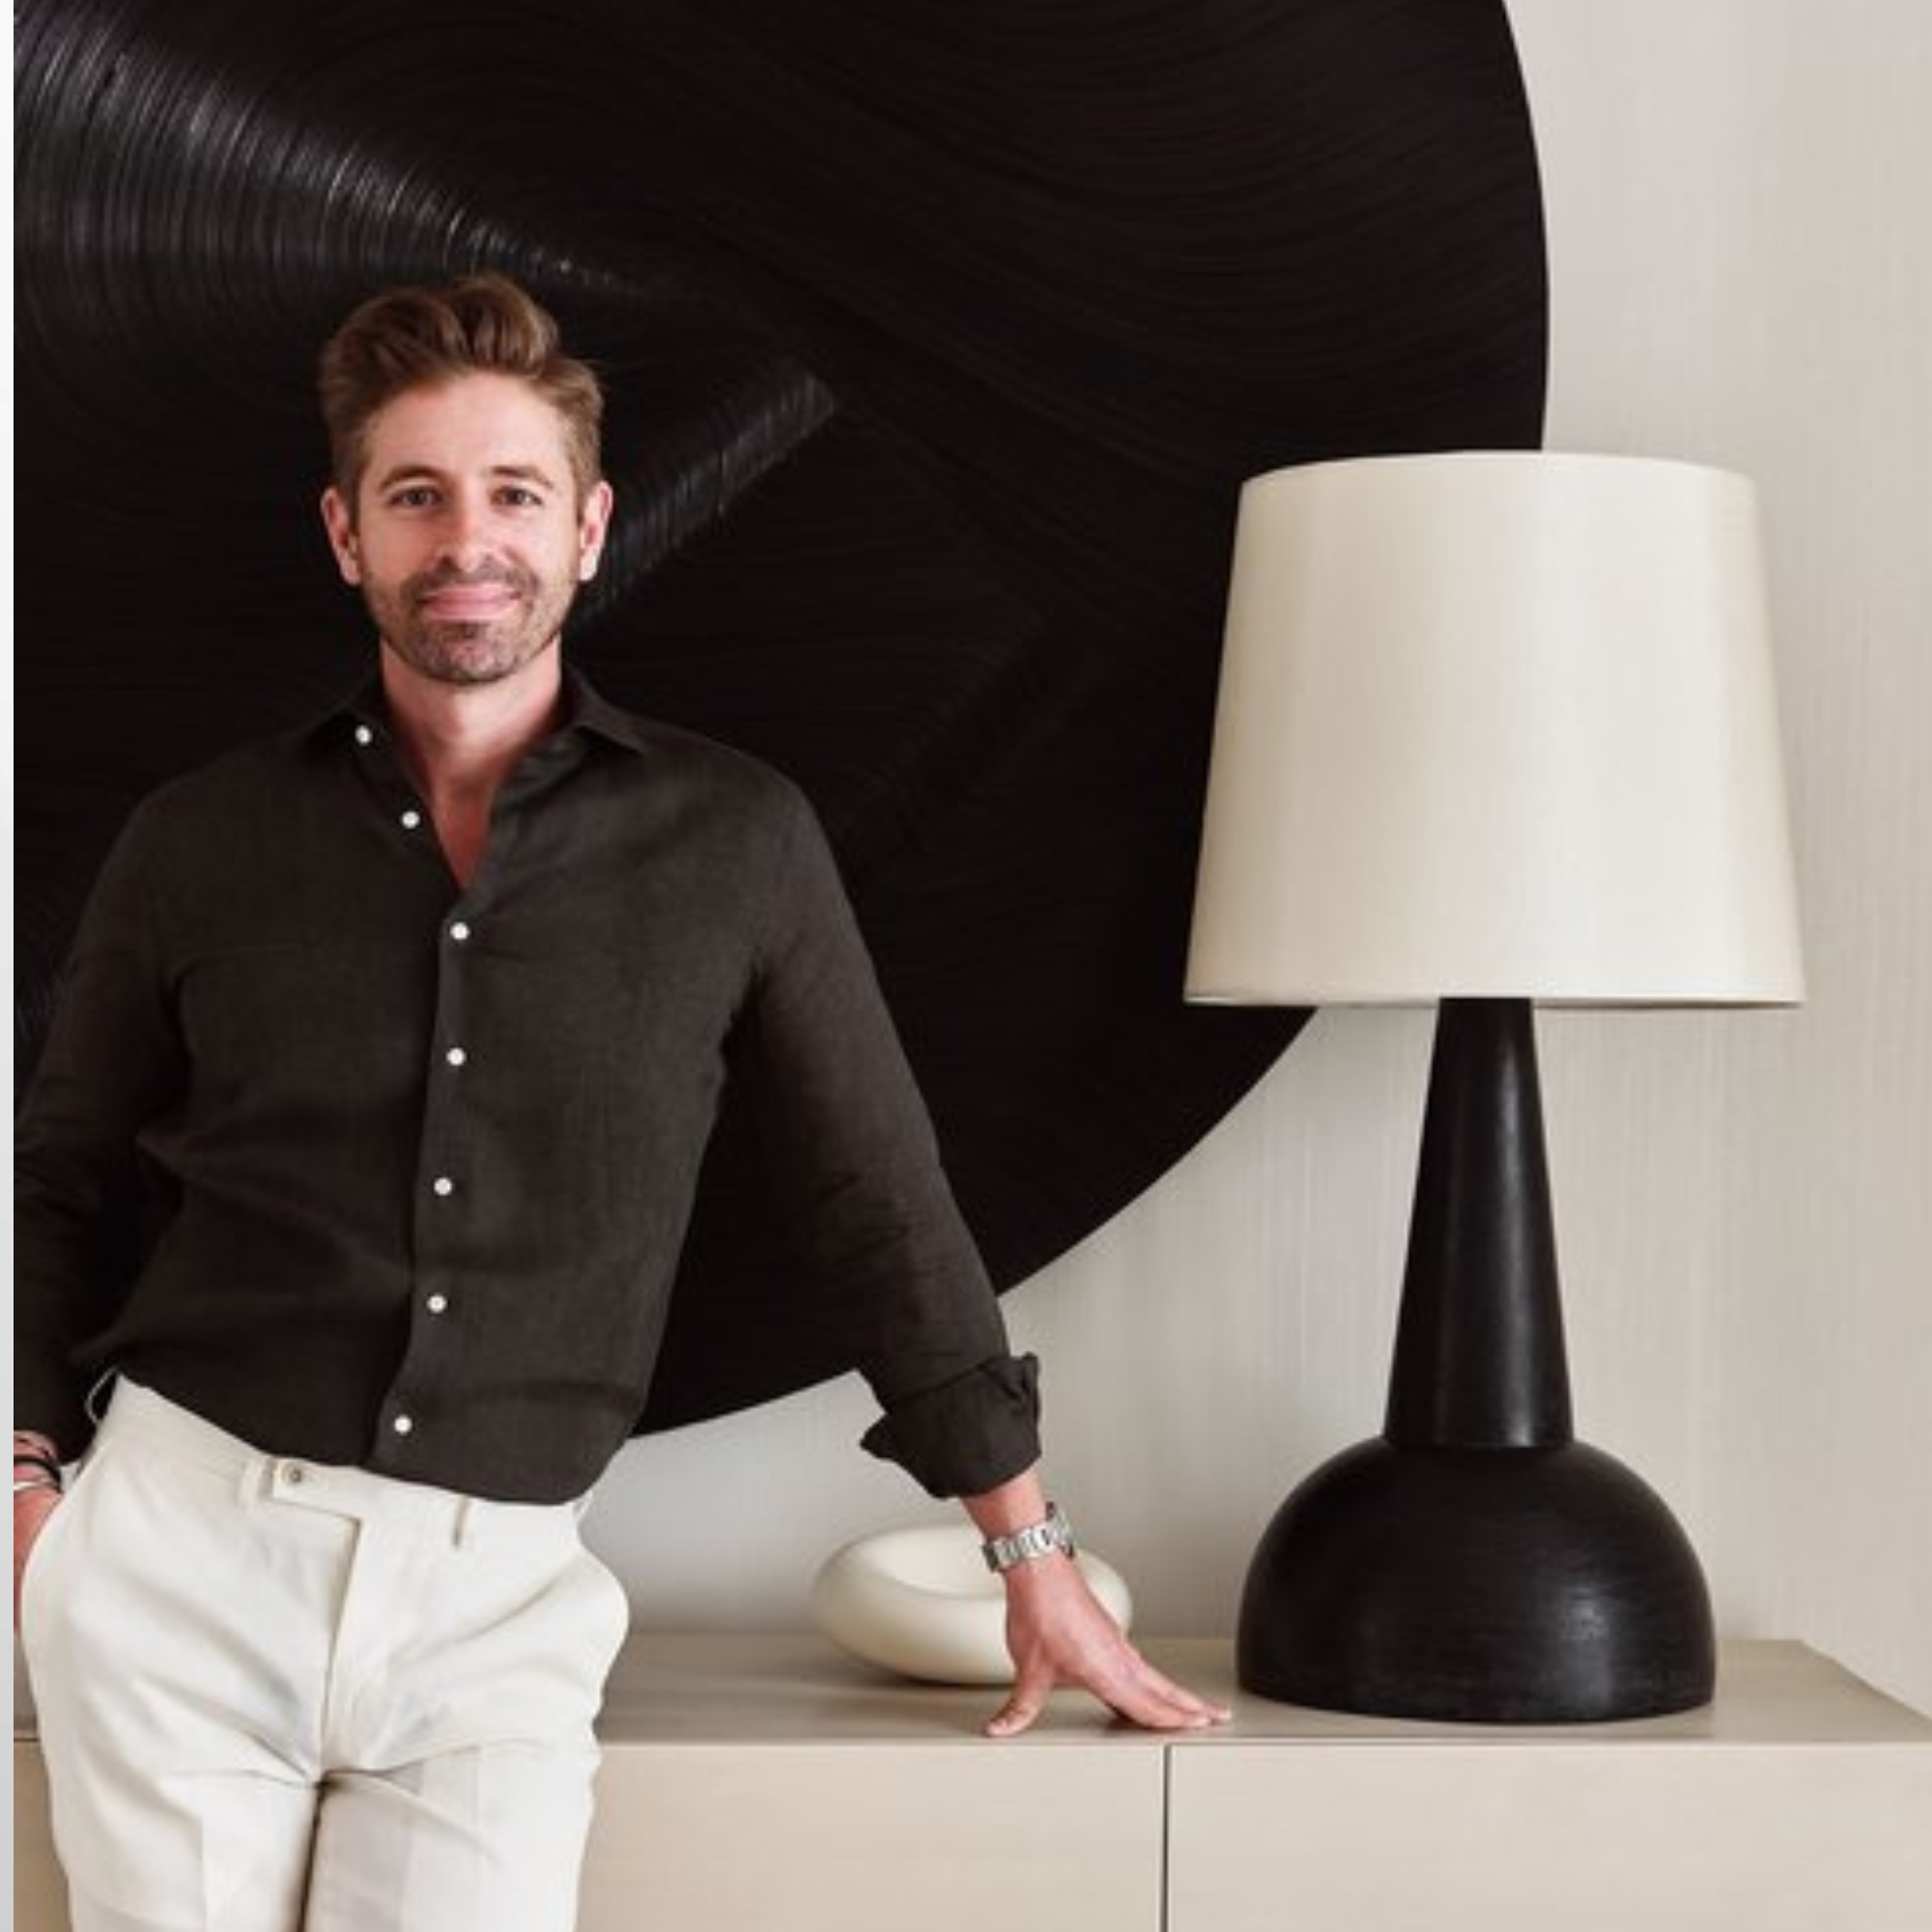 A photo of designer Michael Ellison leaning against a table next to a large black-and-white lamp.